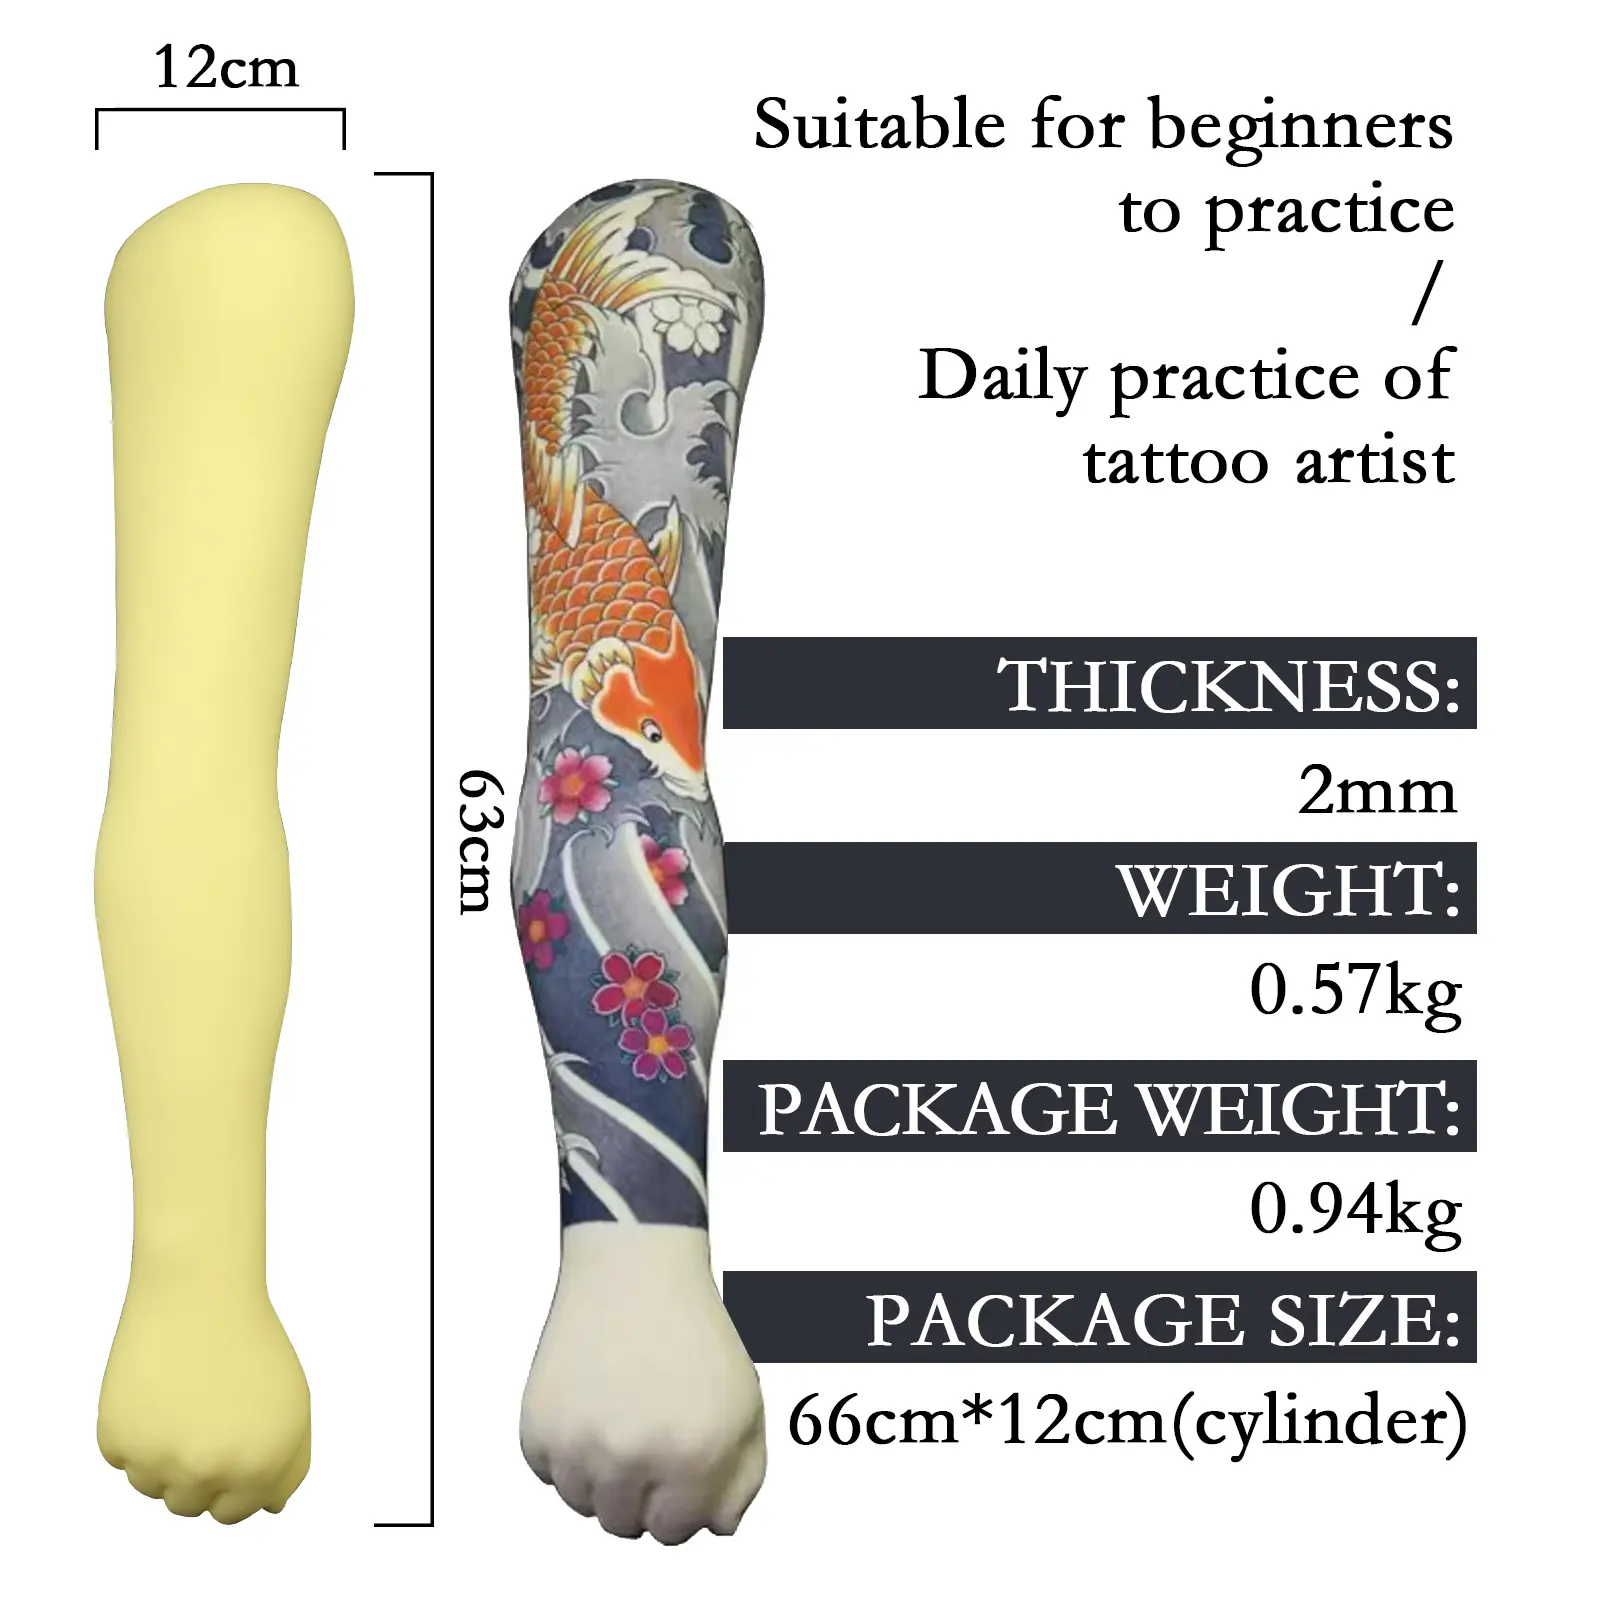 Stereoscopic Tattoo Practice Silicone Arm Realistic Demonstration Of Soft Simulation Tattoo Beginner Training Arm Accessories